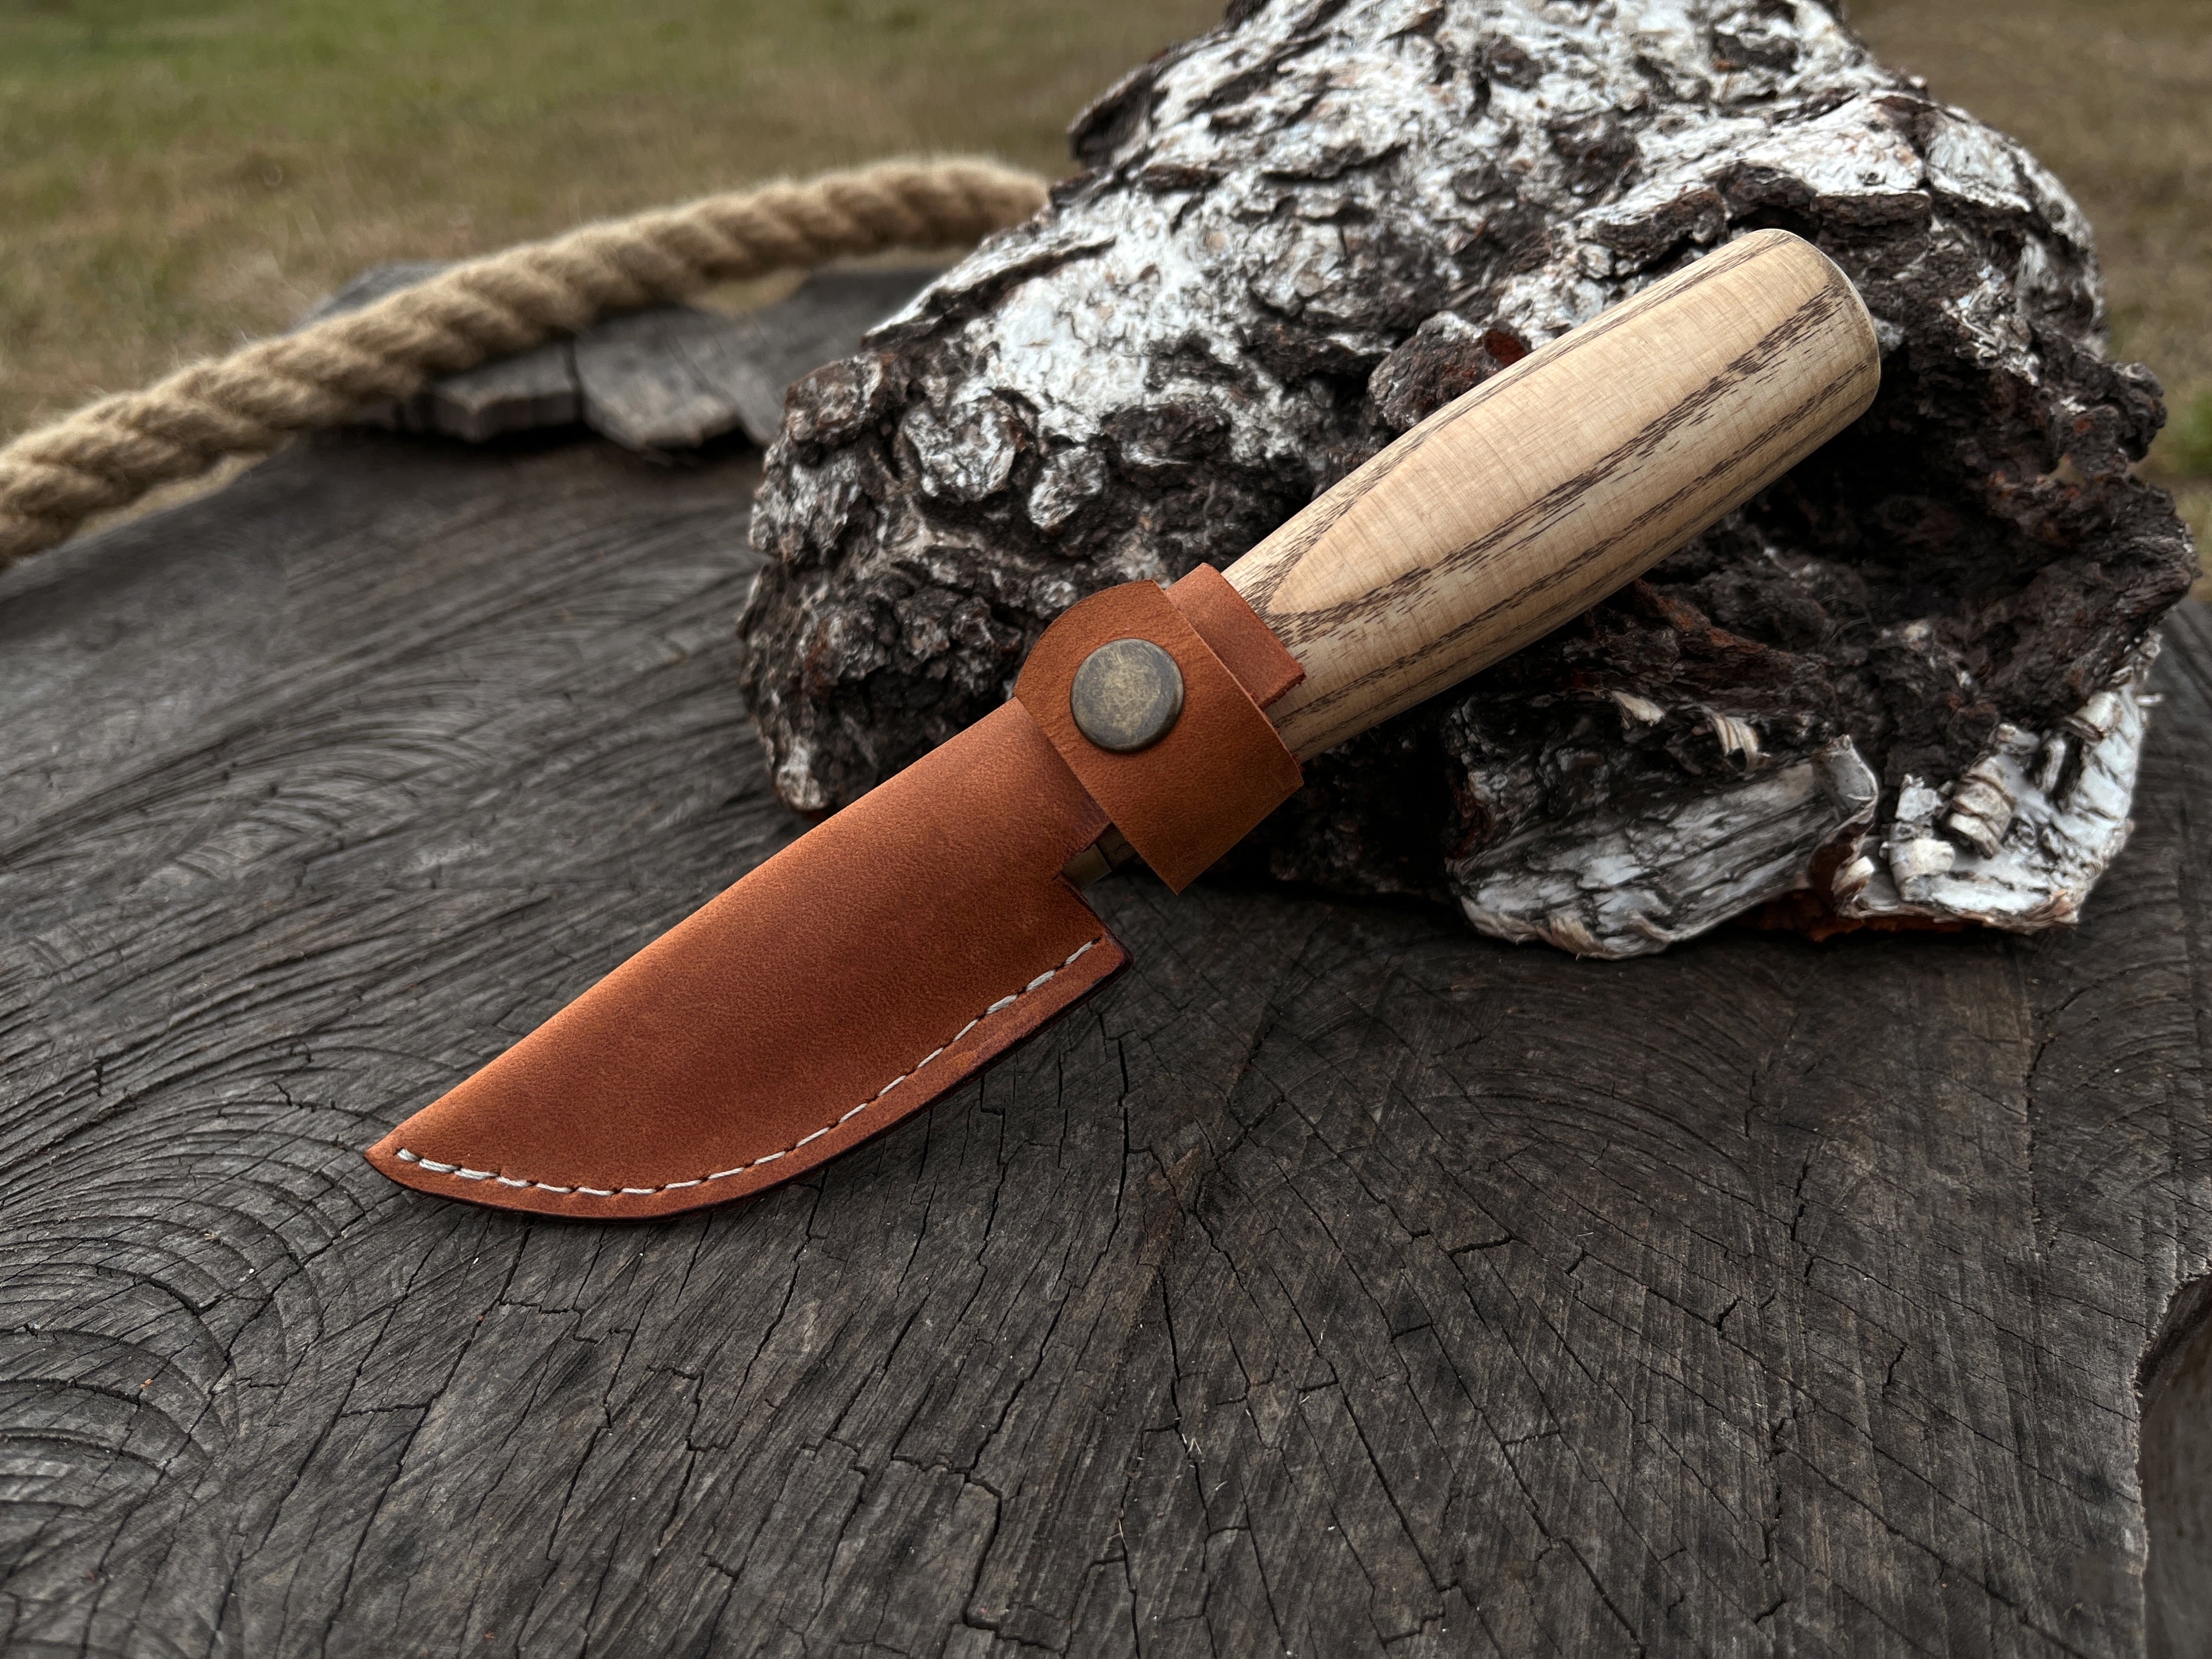 Hand-Forged Whittling Sloyd Knife, 7 cm (2.8 inches)